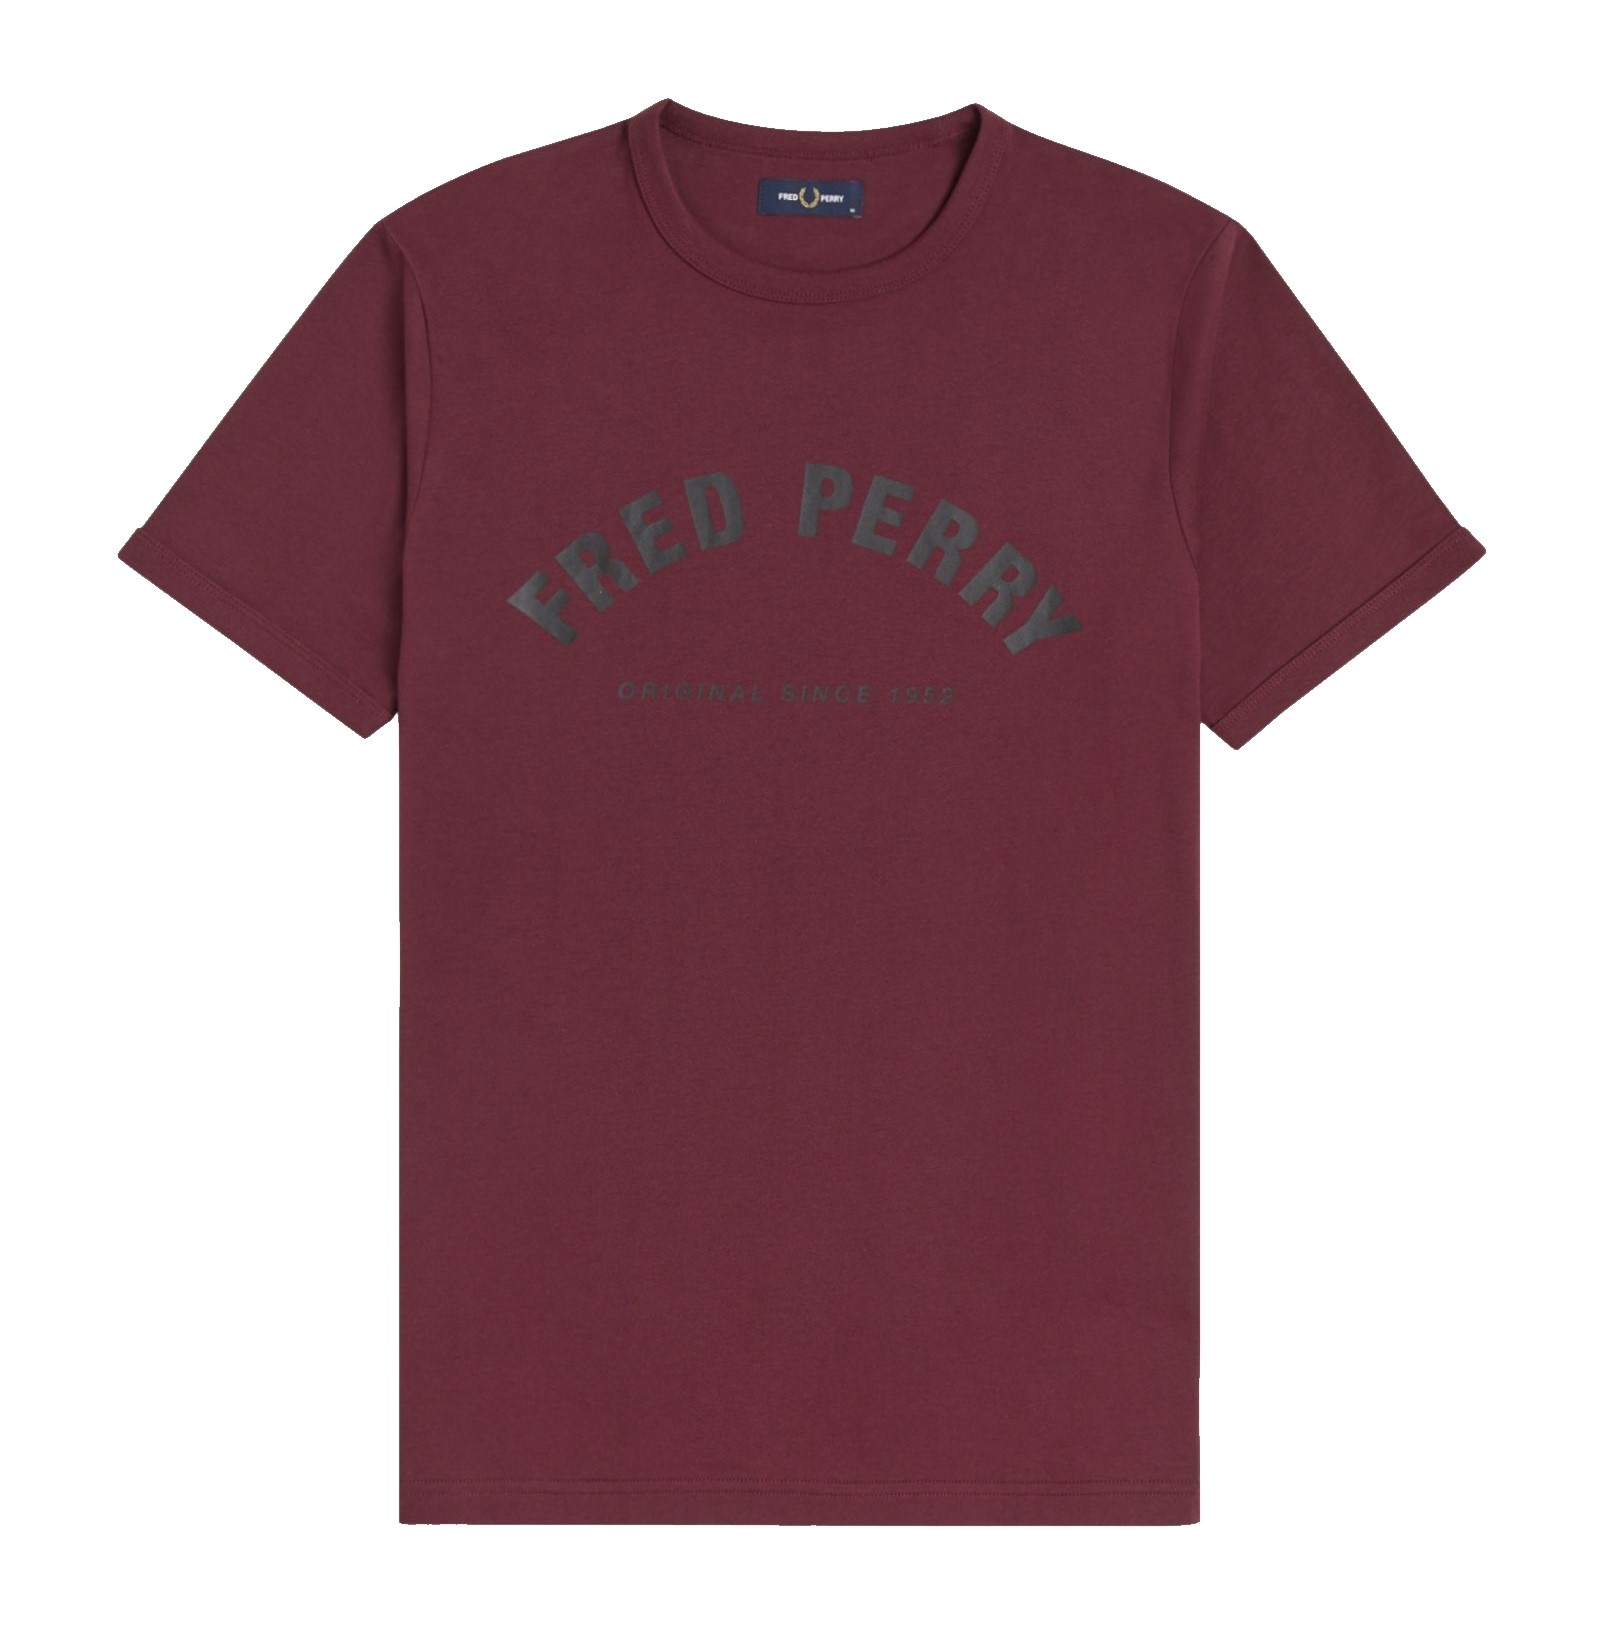 Fred Perry Arch Branded Tee Mahogany